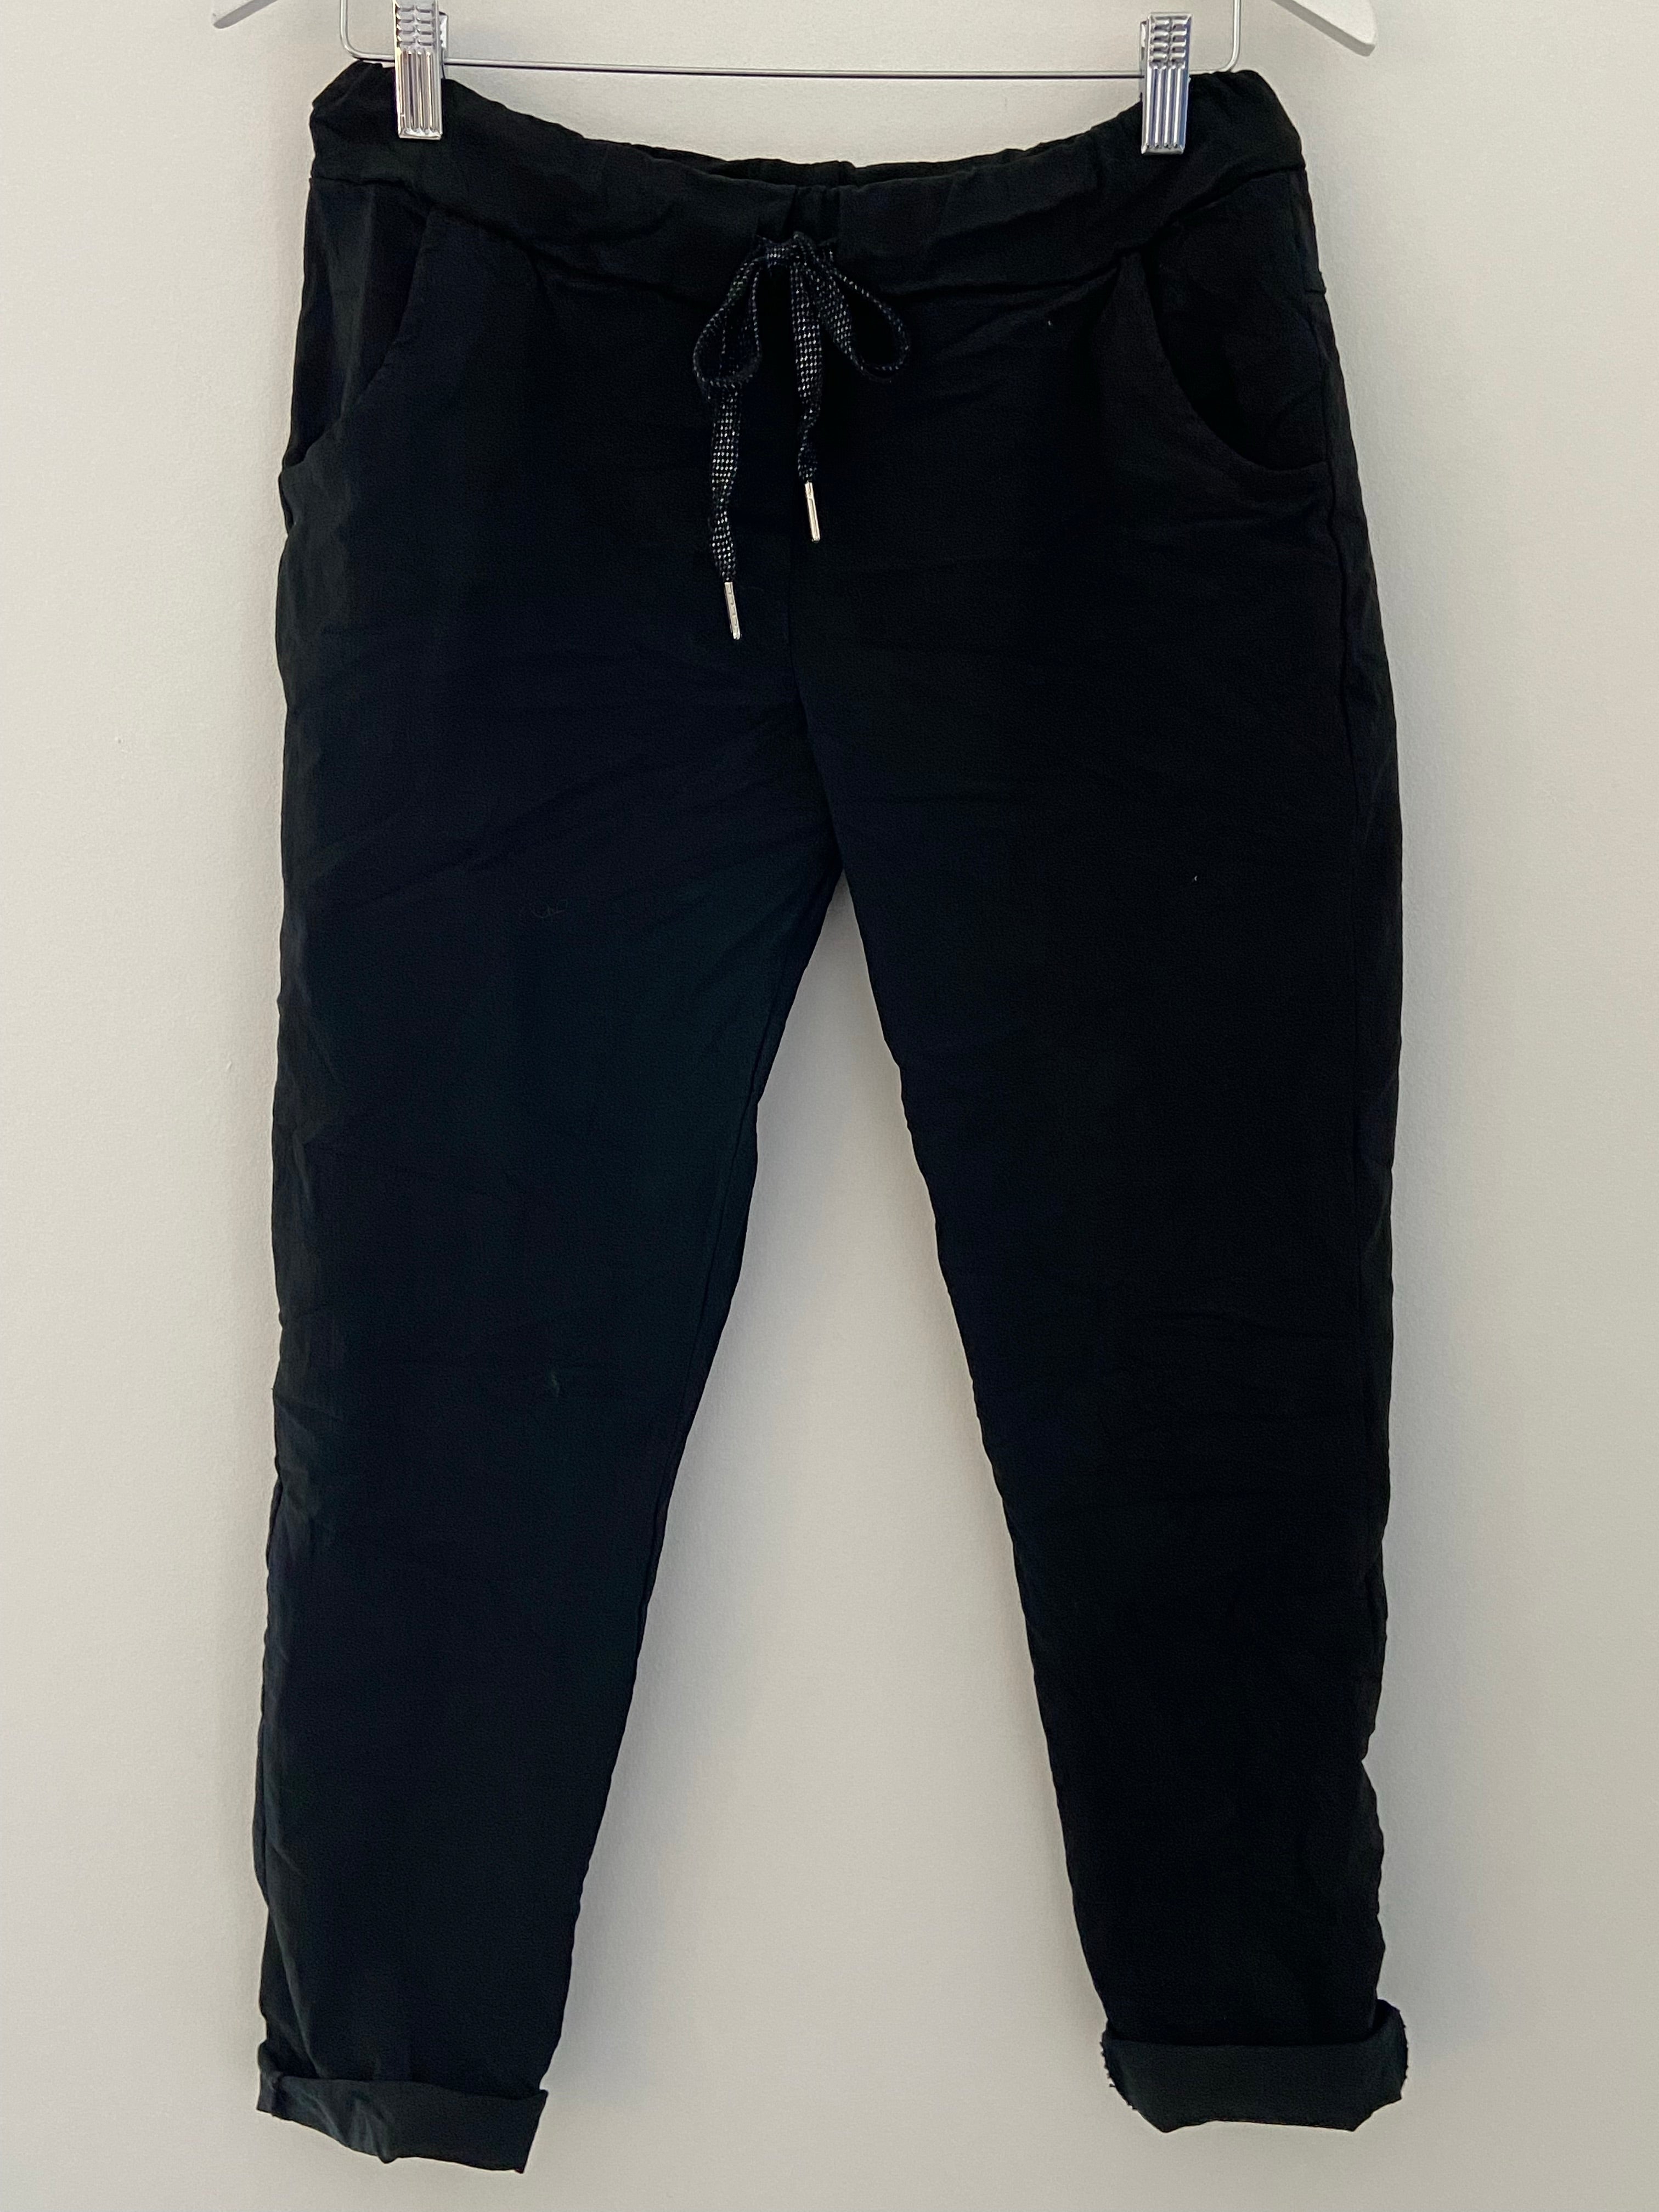 Slimfit Stretch Cotton Joggers in Black